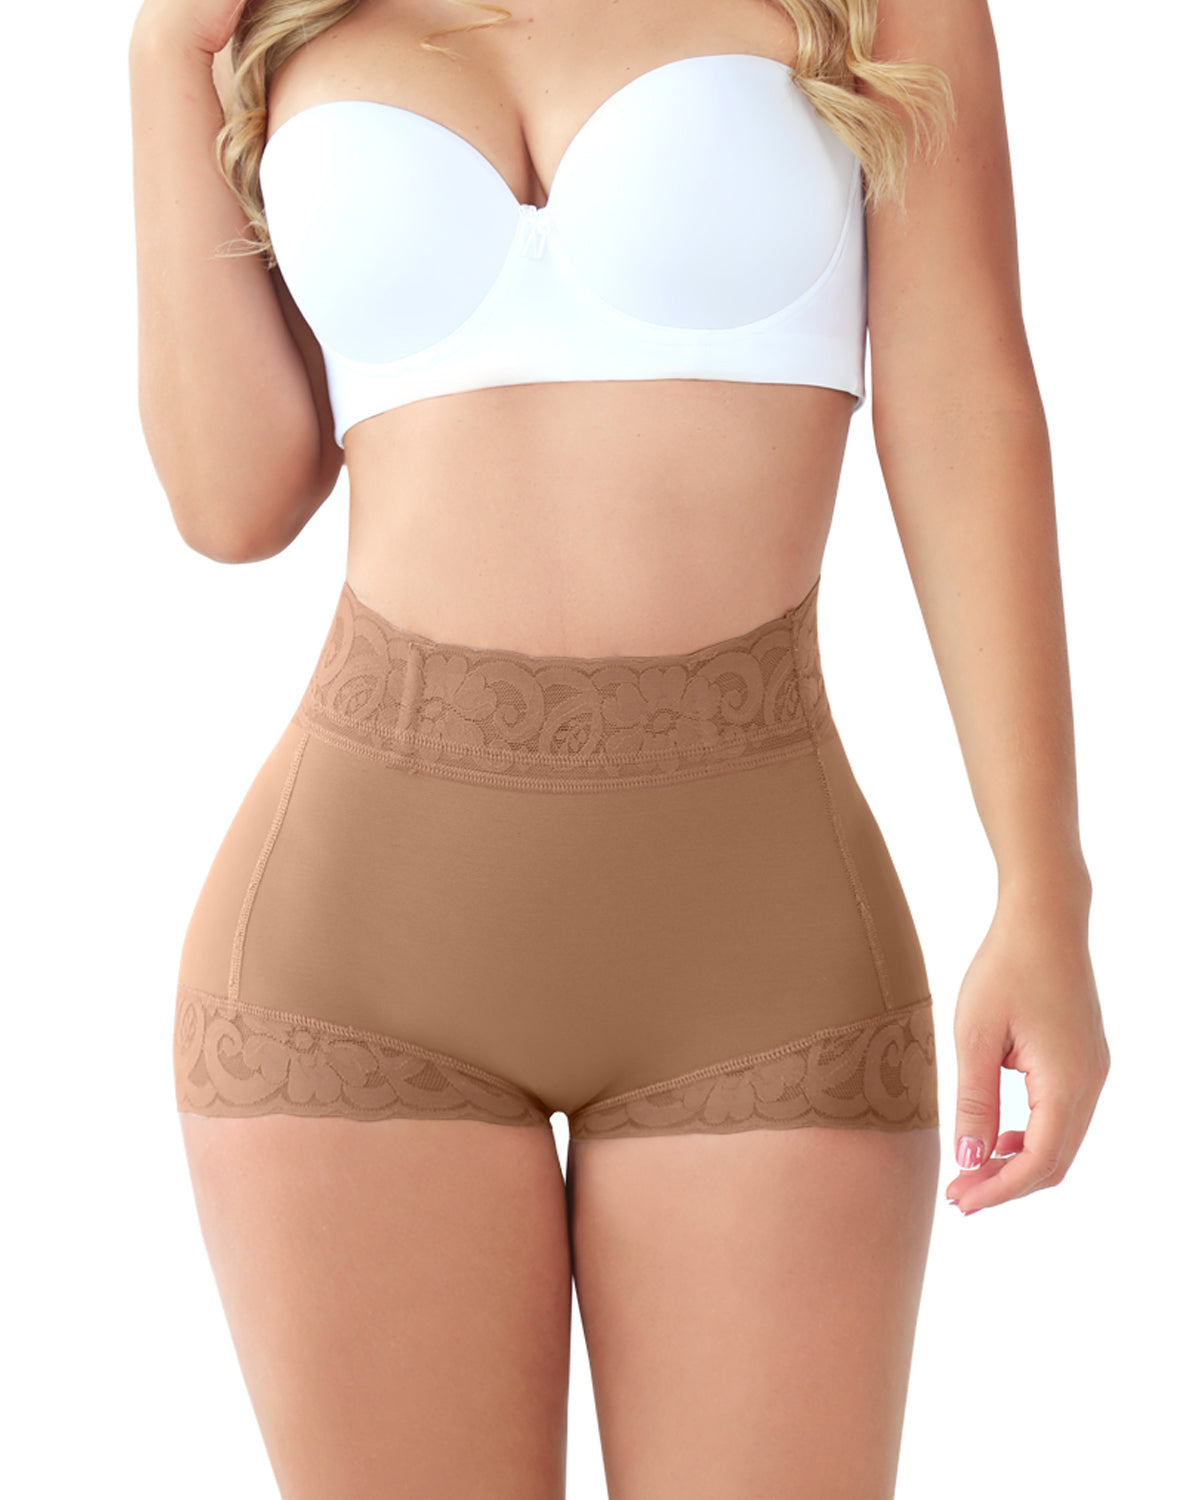 Fairy Bloom Bengkung Kempis Perut Plus Size Girdle Slimming Pants Butt  Lifter High Waist Shapewear Shaping Underwear